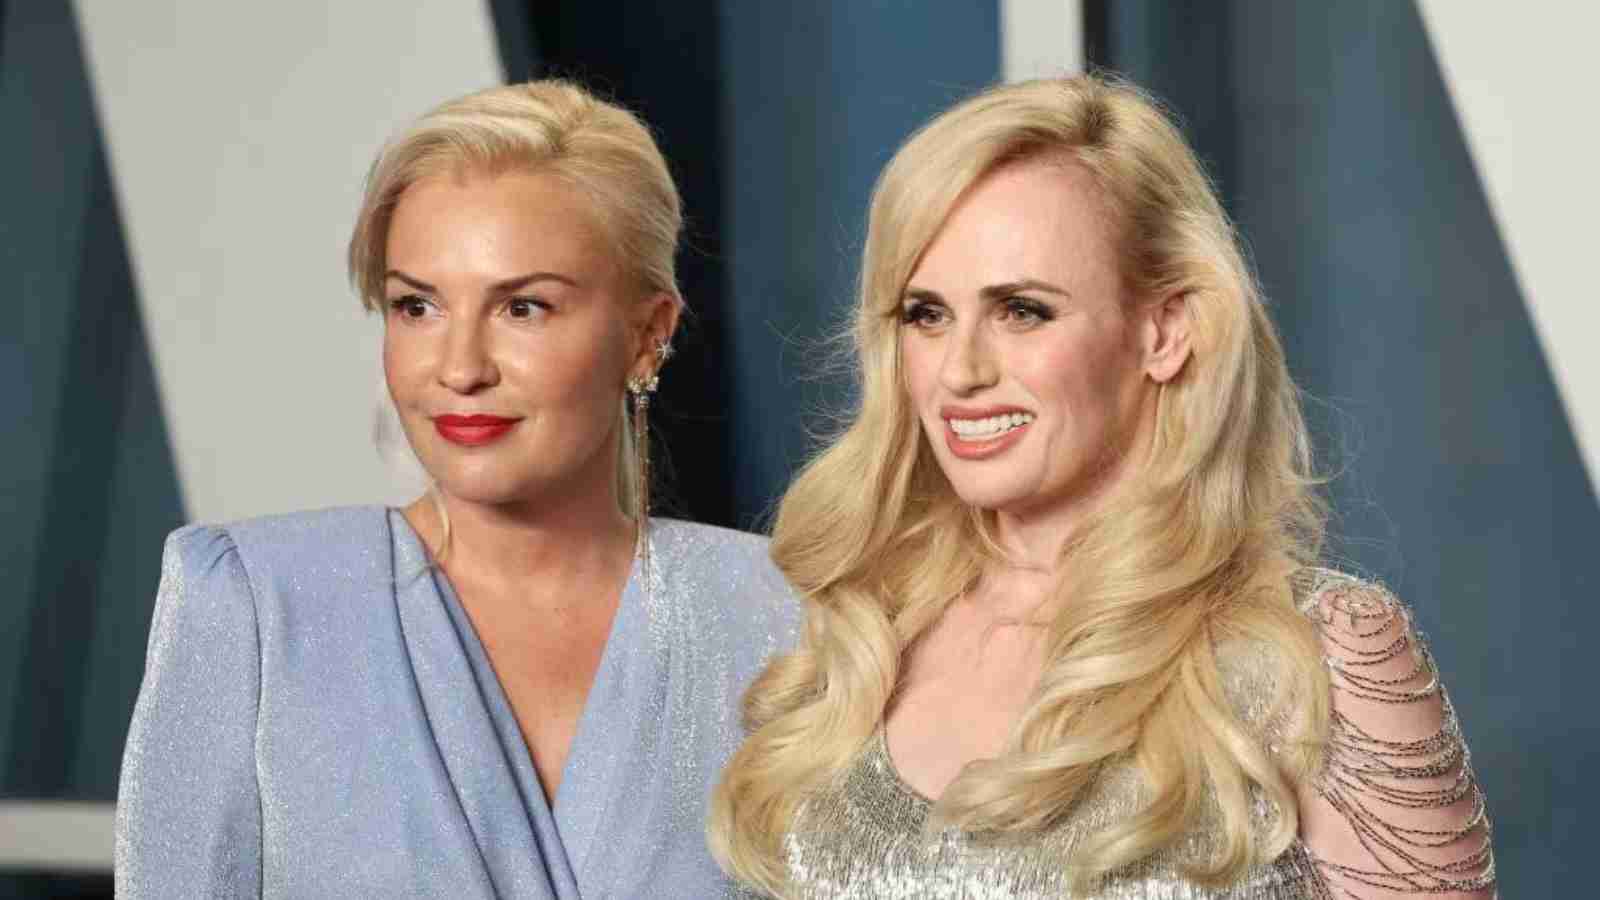 Here's how Rebel Wilson and Ramona Agruma first connected